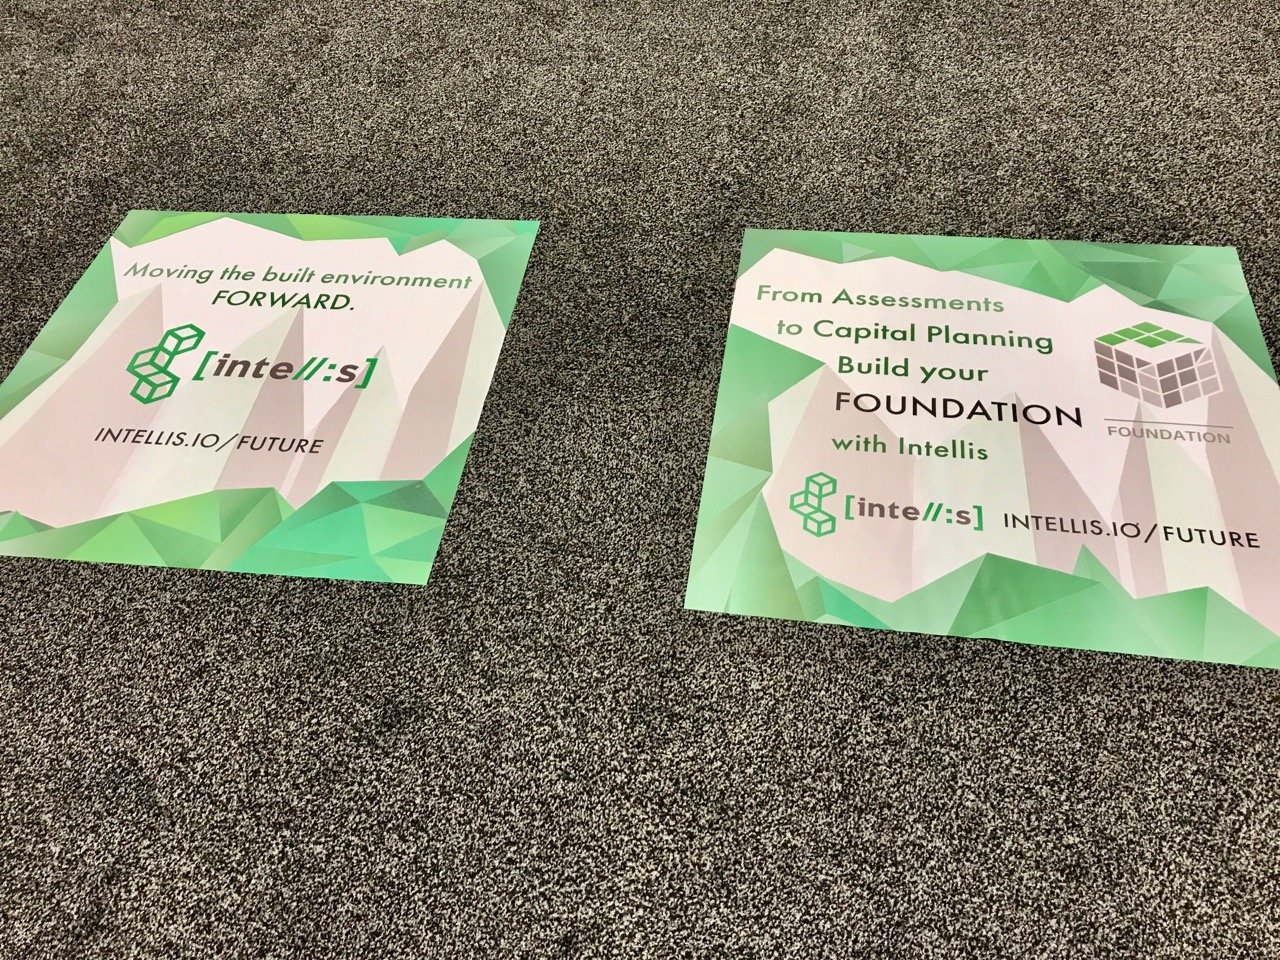 Intellis floor decals on display at IFMA World Workplace 